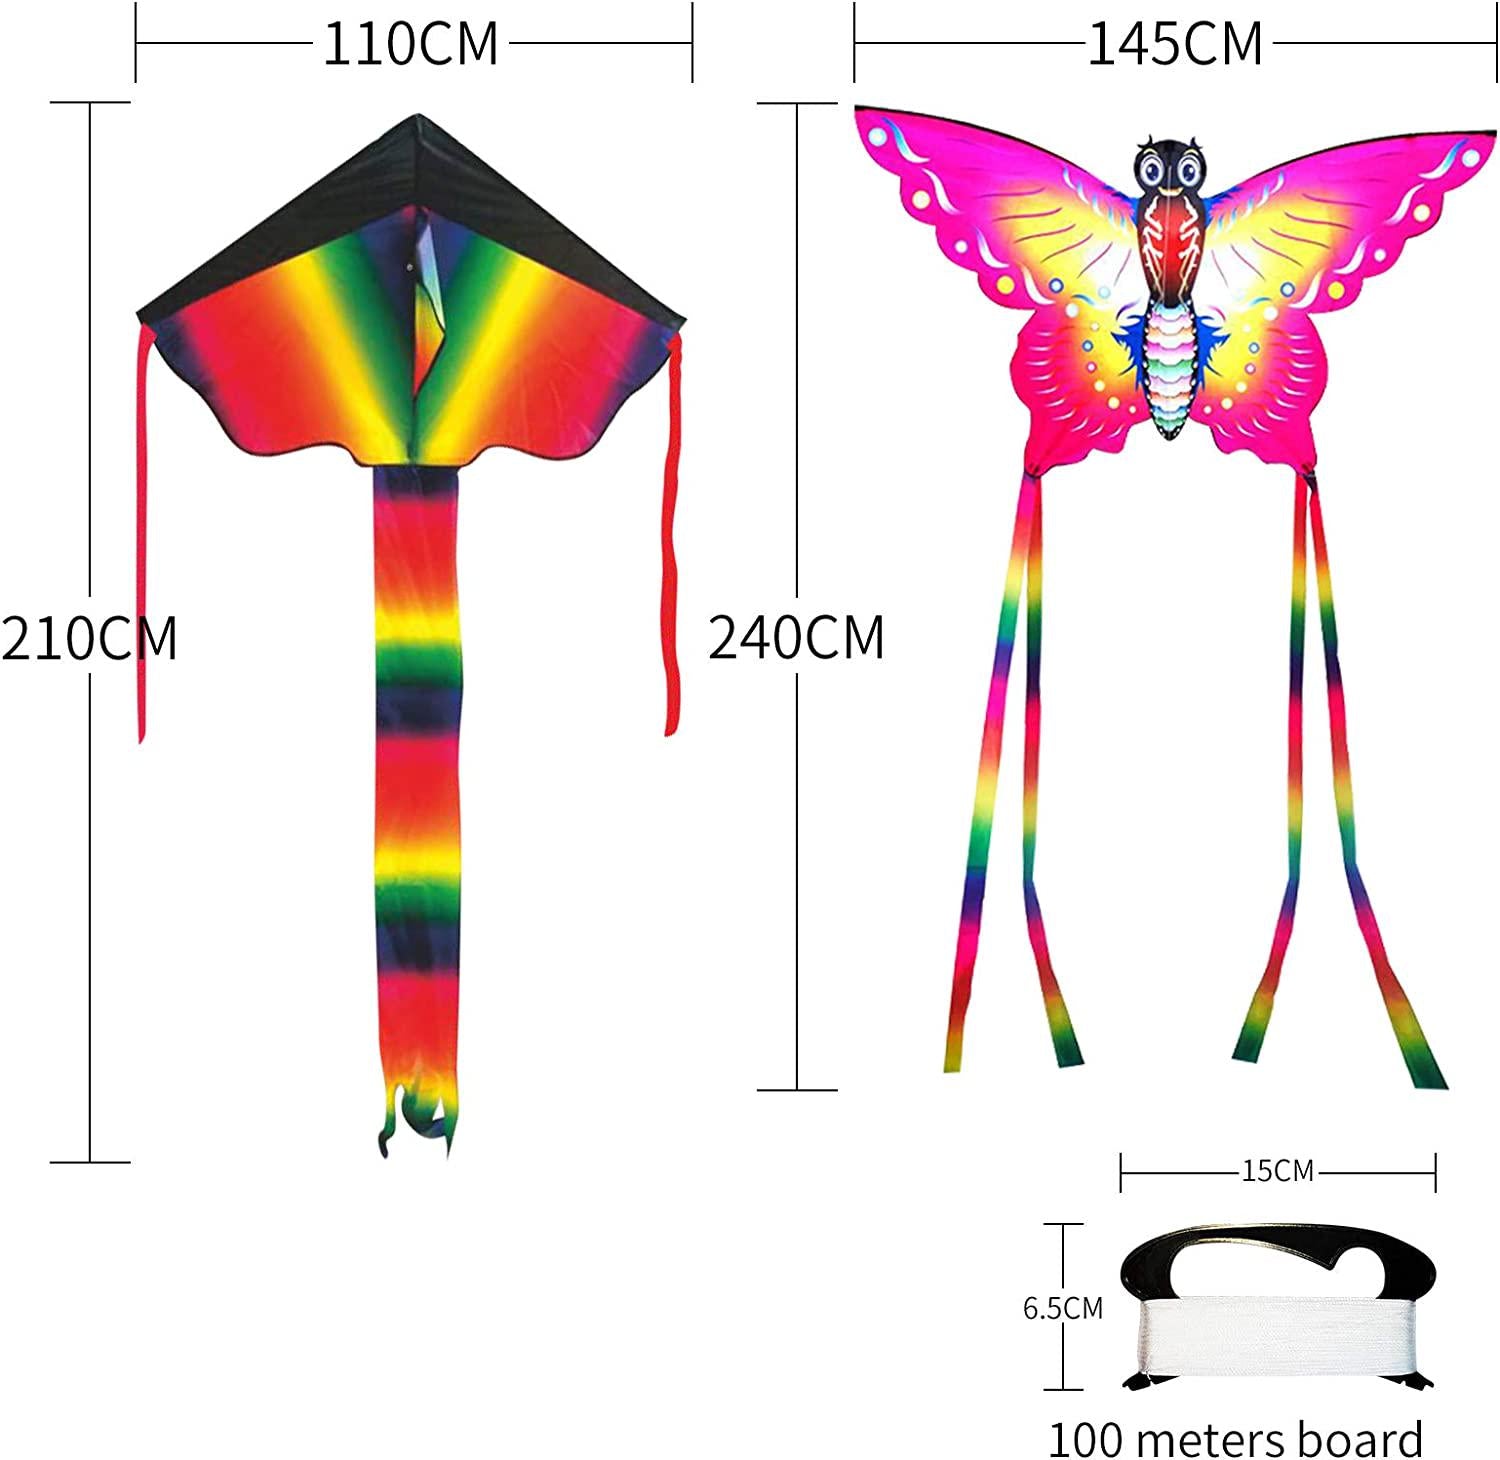 Lamonty, Lamonty 2 Pack Kites - Large Butterfly Kite and Black Rainbow for Children and Adult with Long Colorful Tail String Line Accessories Easy to Soar High Outdoor Sports Game Activities or Beach Trip